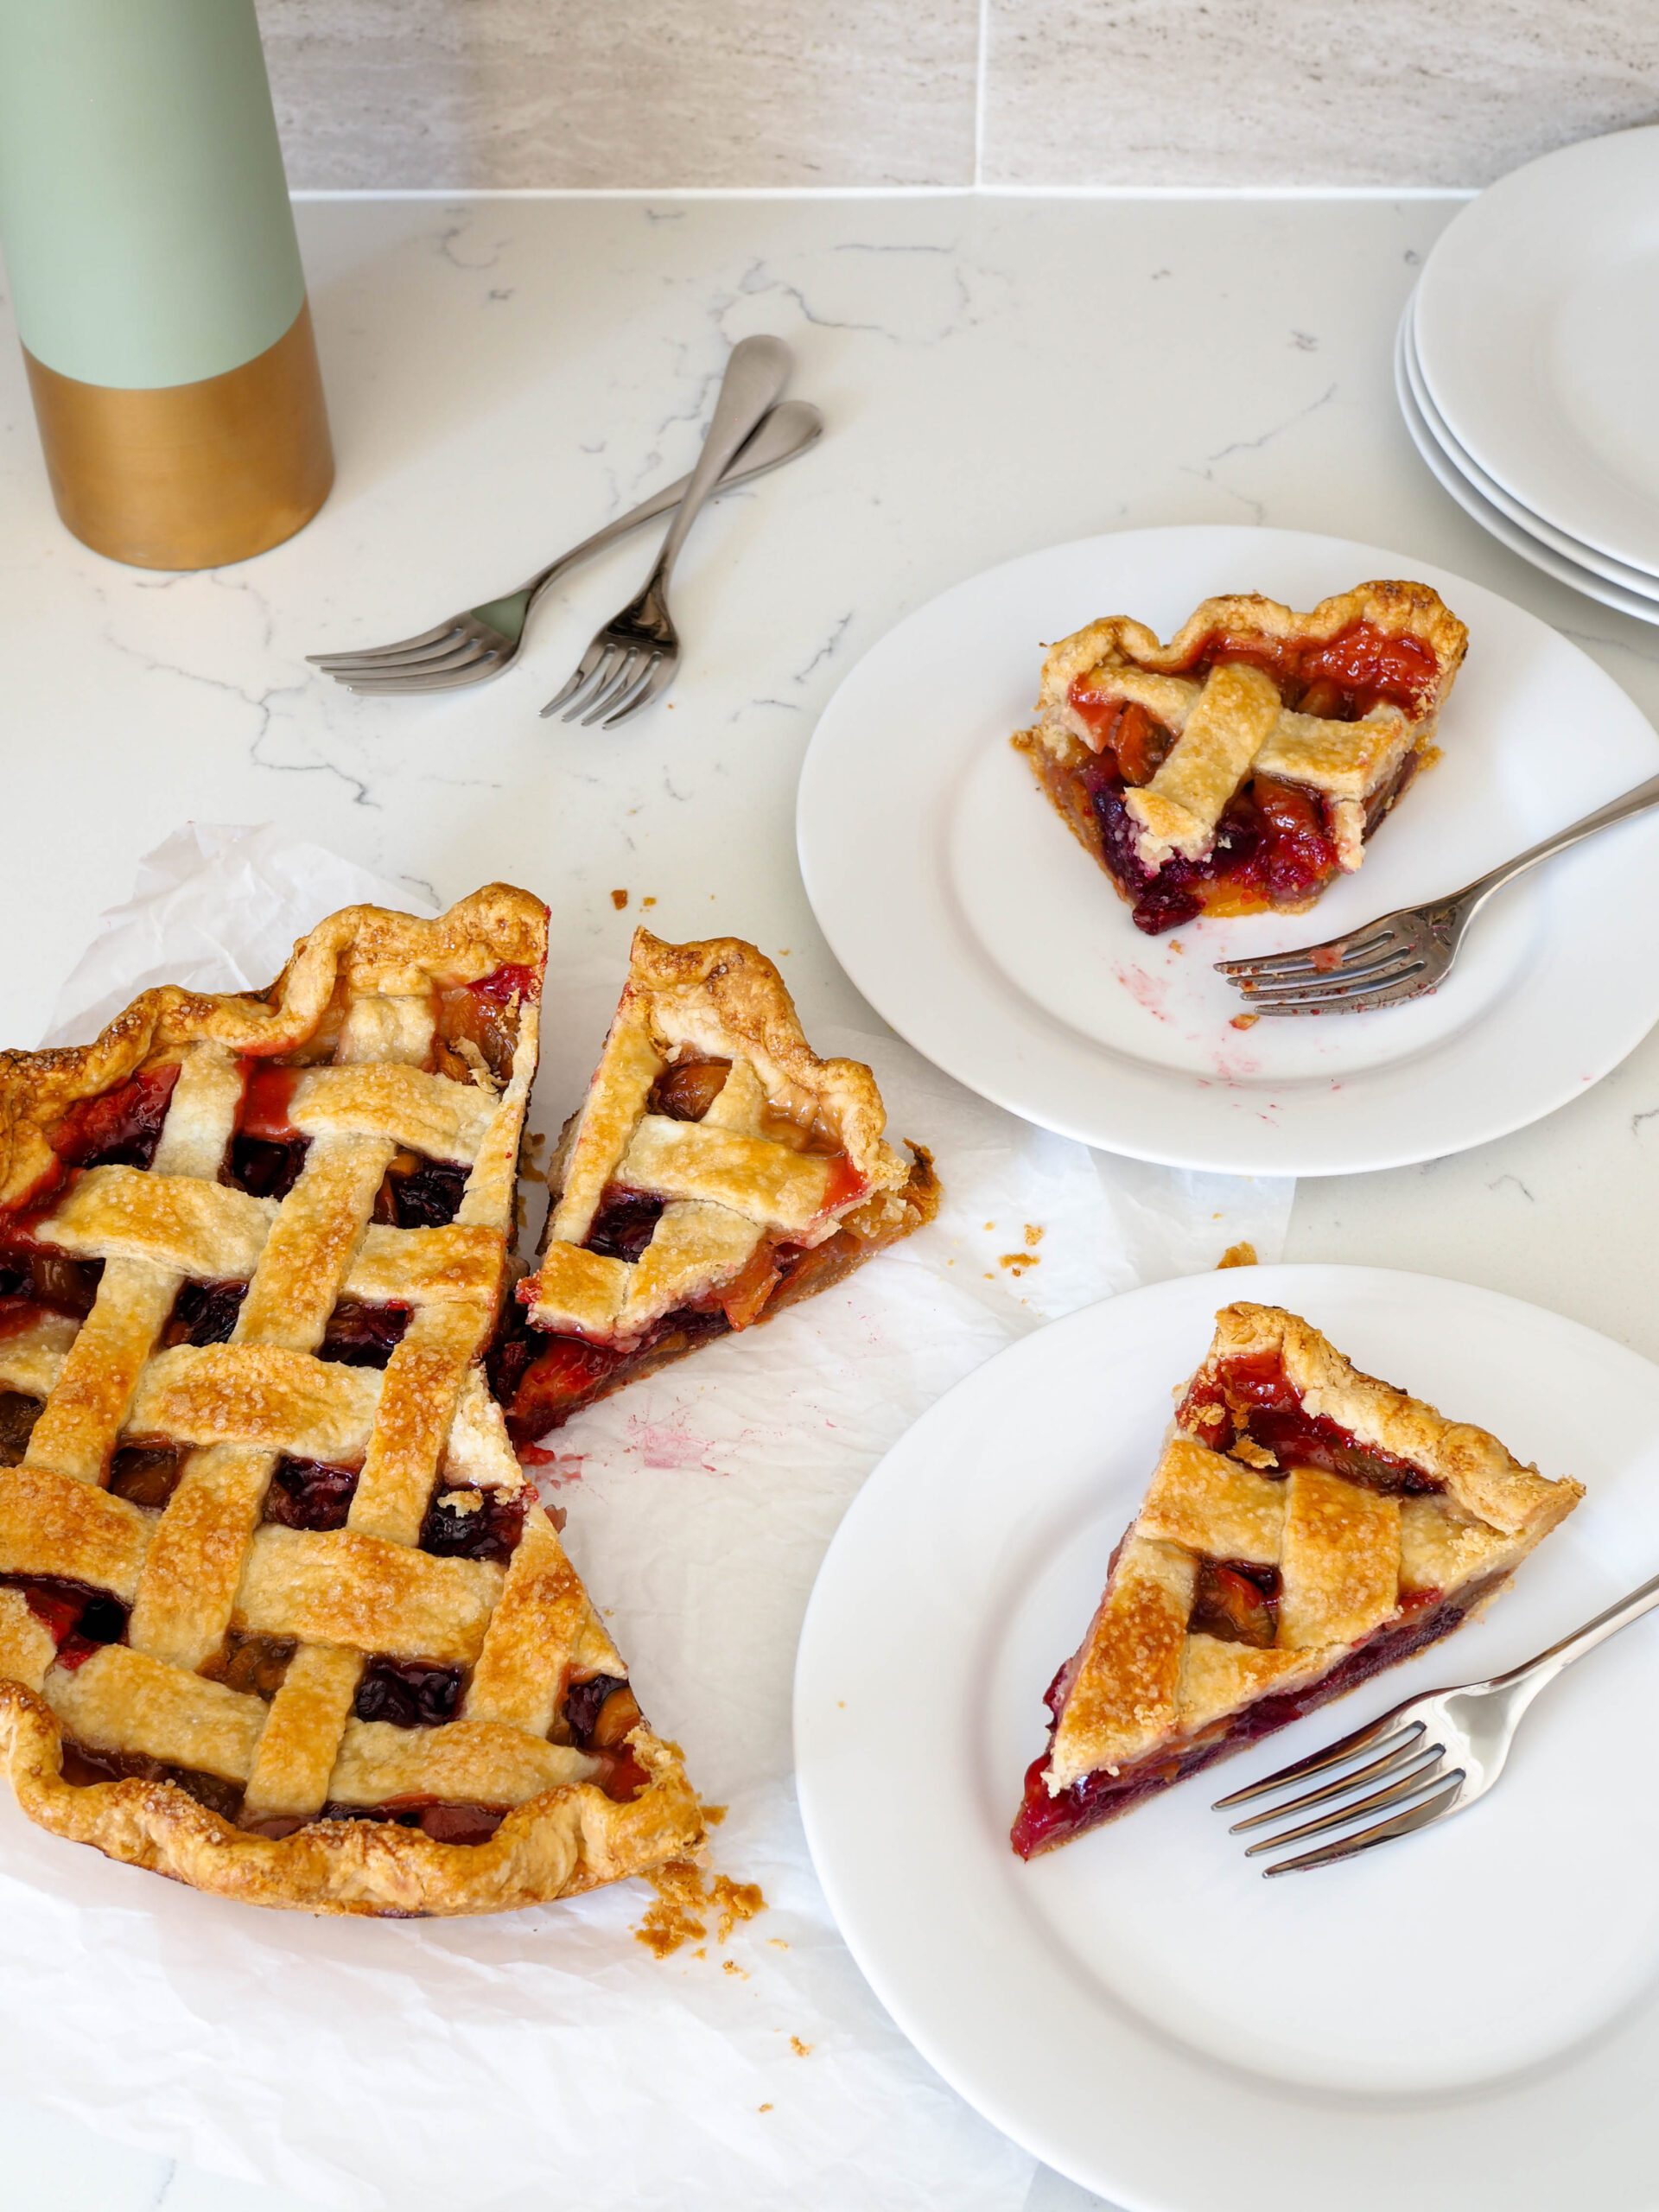 A cherry pie has three slices cut out of it, with two on plates with forks.